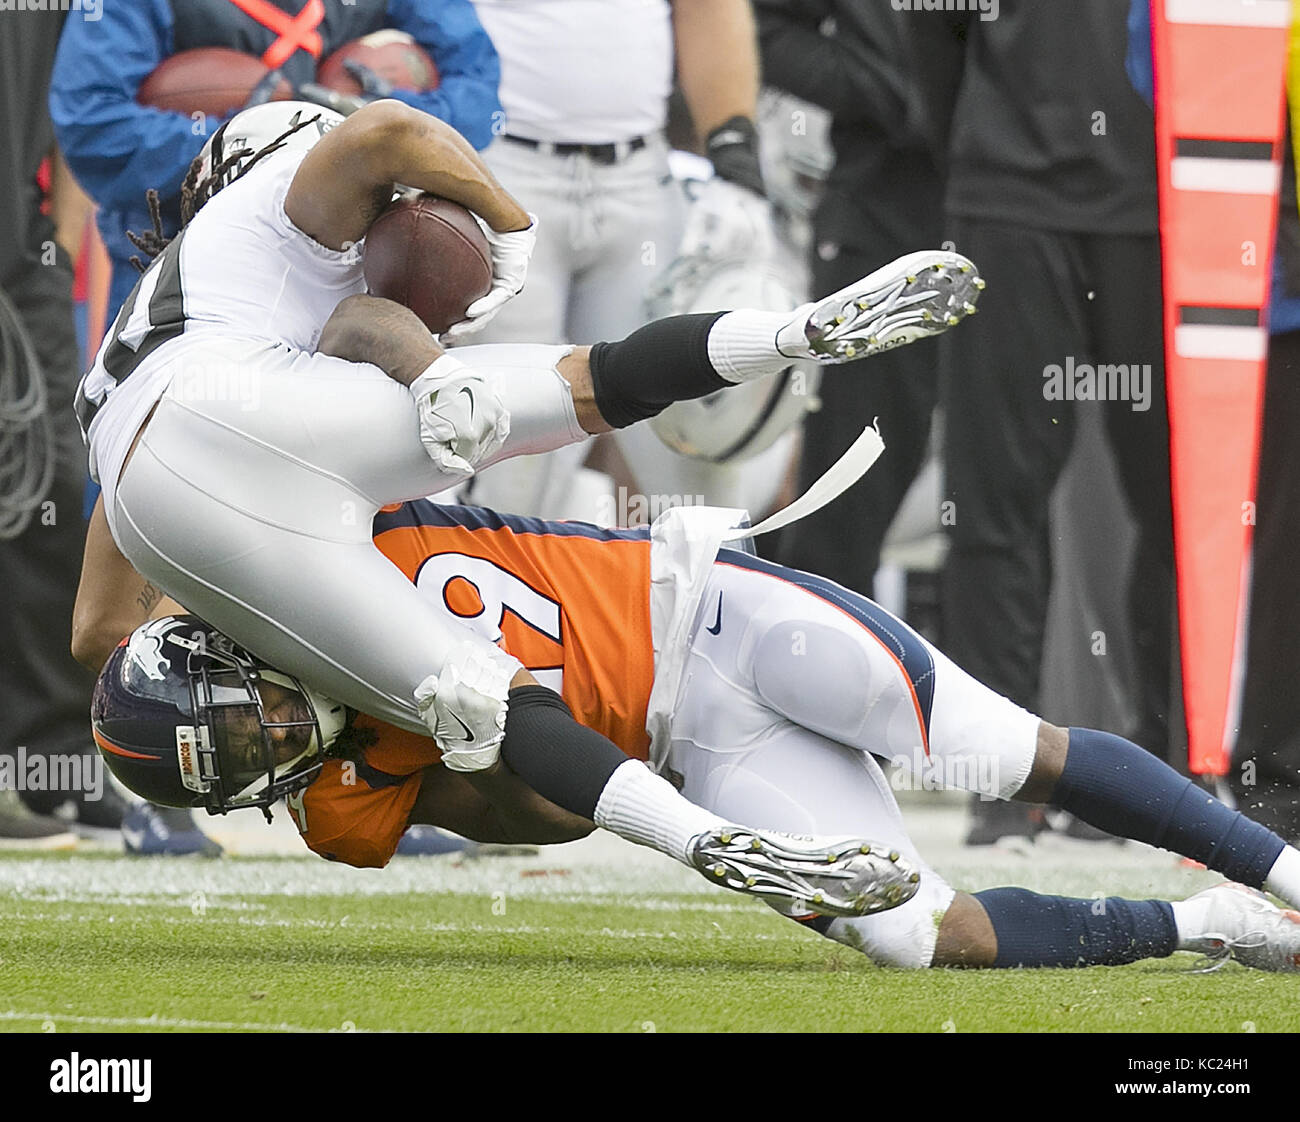 Denver, Colorado, USA. 1st Oct, 2017. Broncos CB BRADLEY ROBY, bottom, makes a tackle on Raiders SETH ROBERTS, left, during the 1st. Half at Sports Authority Field at Mile High Sunday afternoon. Broncos beat the Raiders 16-10. Credit: Hector Acevedo/ZUMA Wire/Alamy Live News Stock Photo